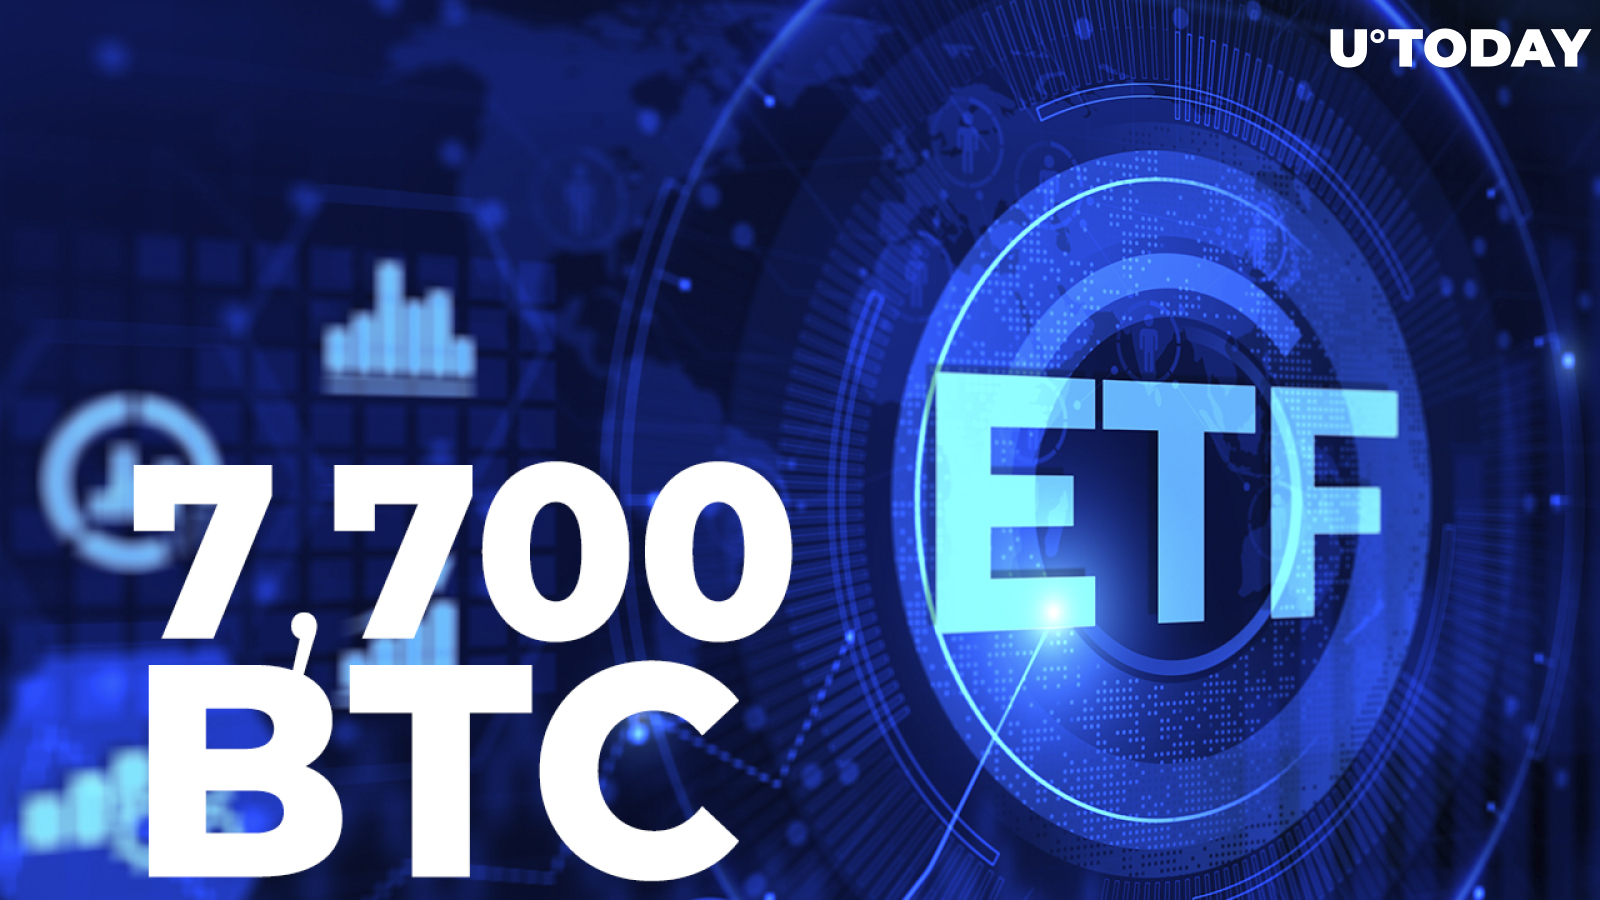 Purpose ETF Increases Its Bitcoin Holdings by 31%, Now Owns 32,329 BTC